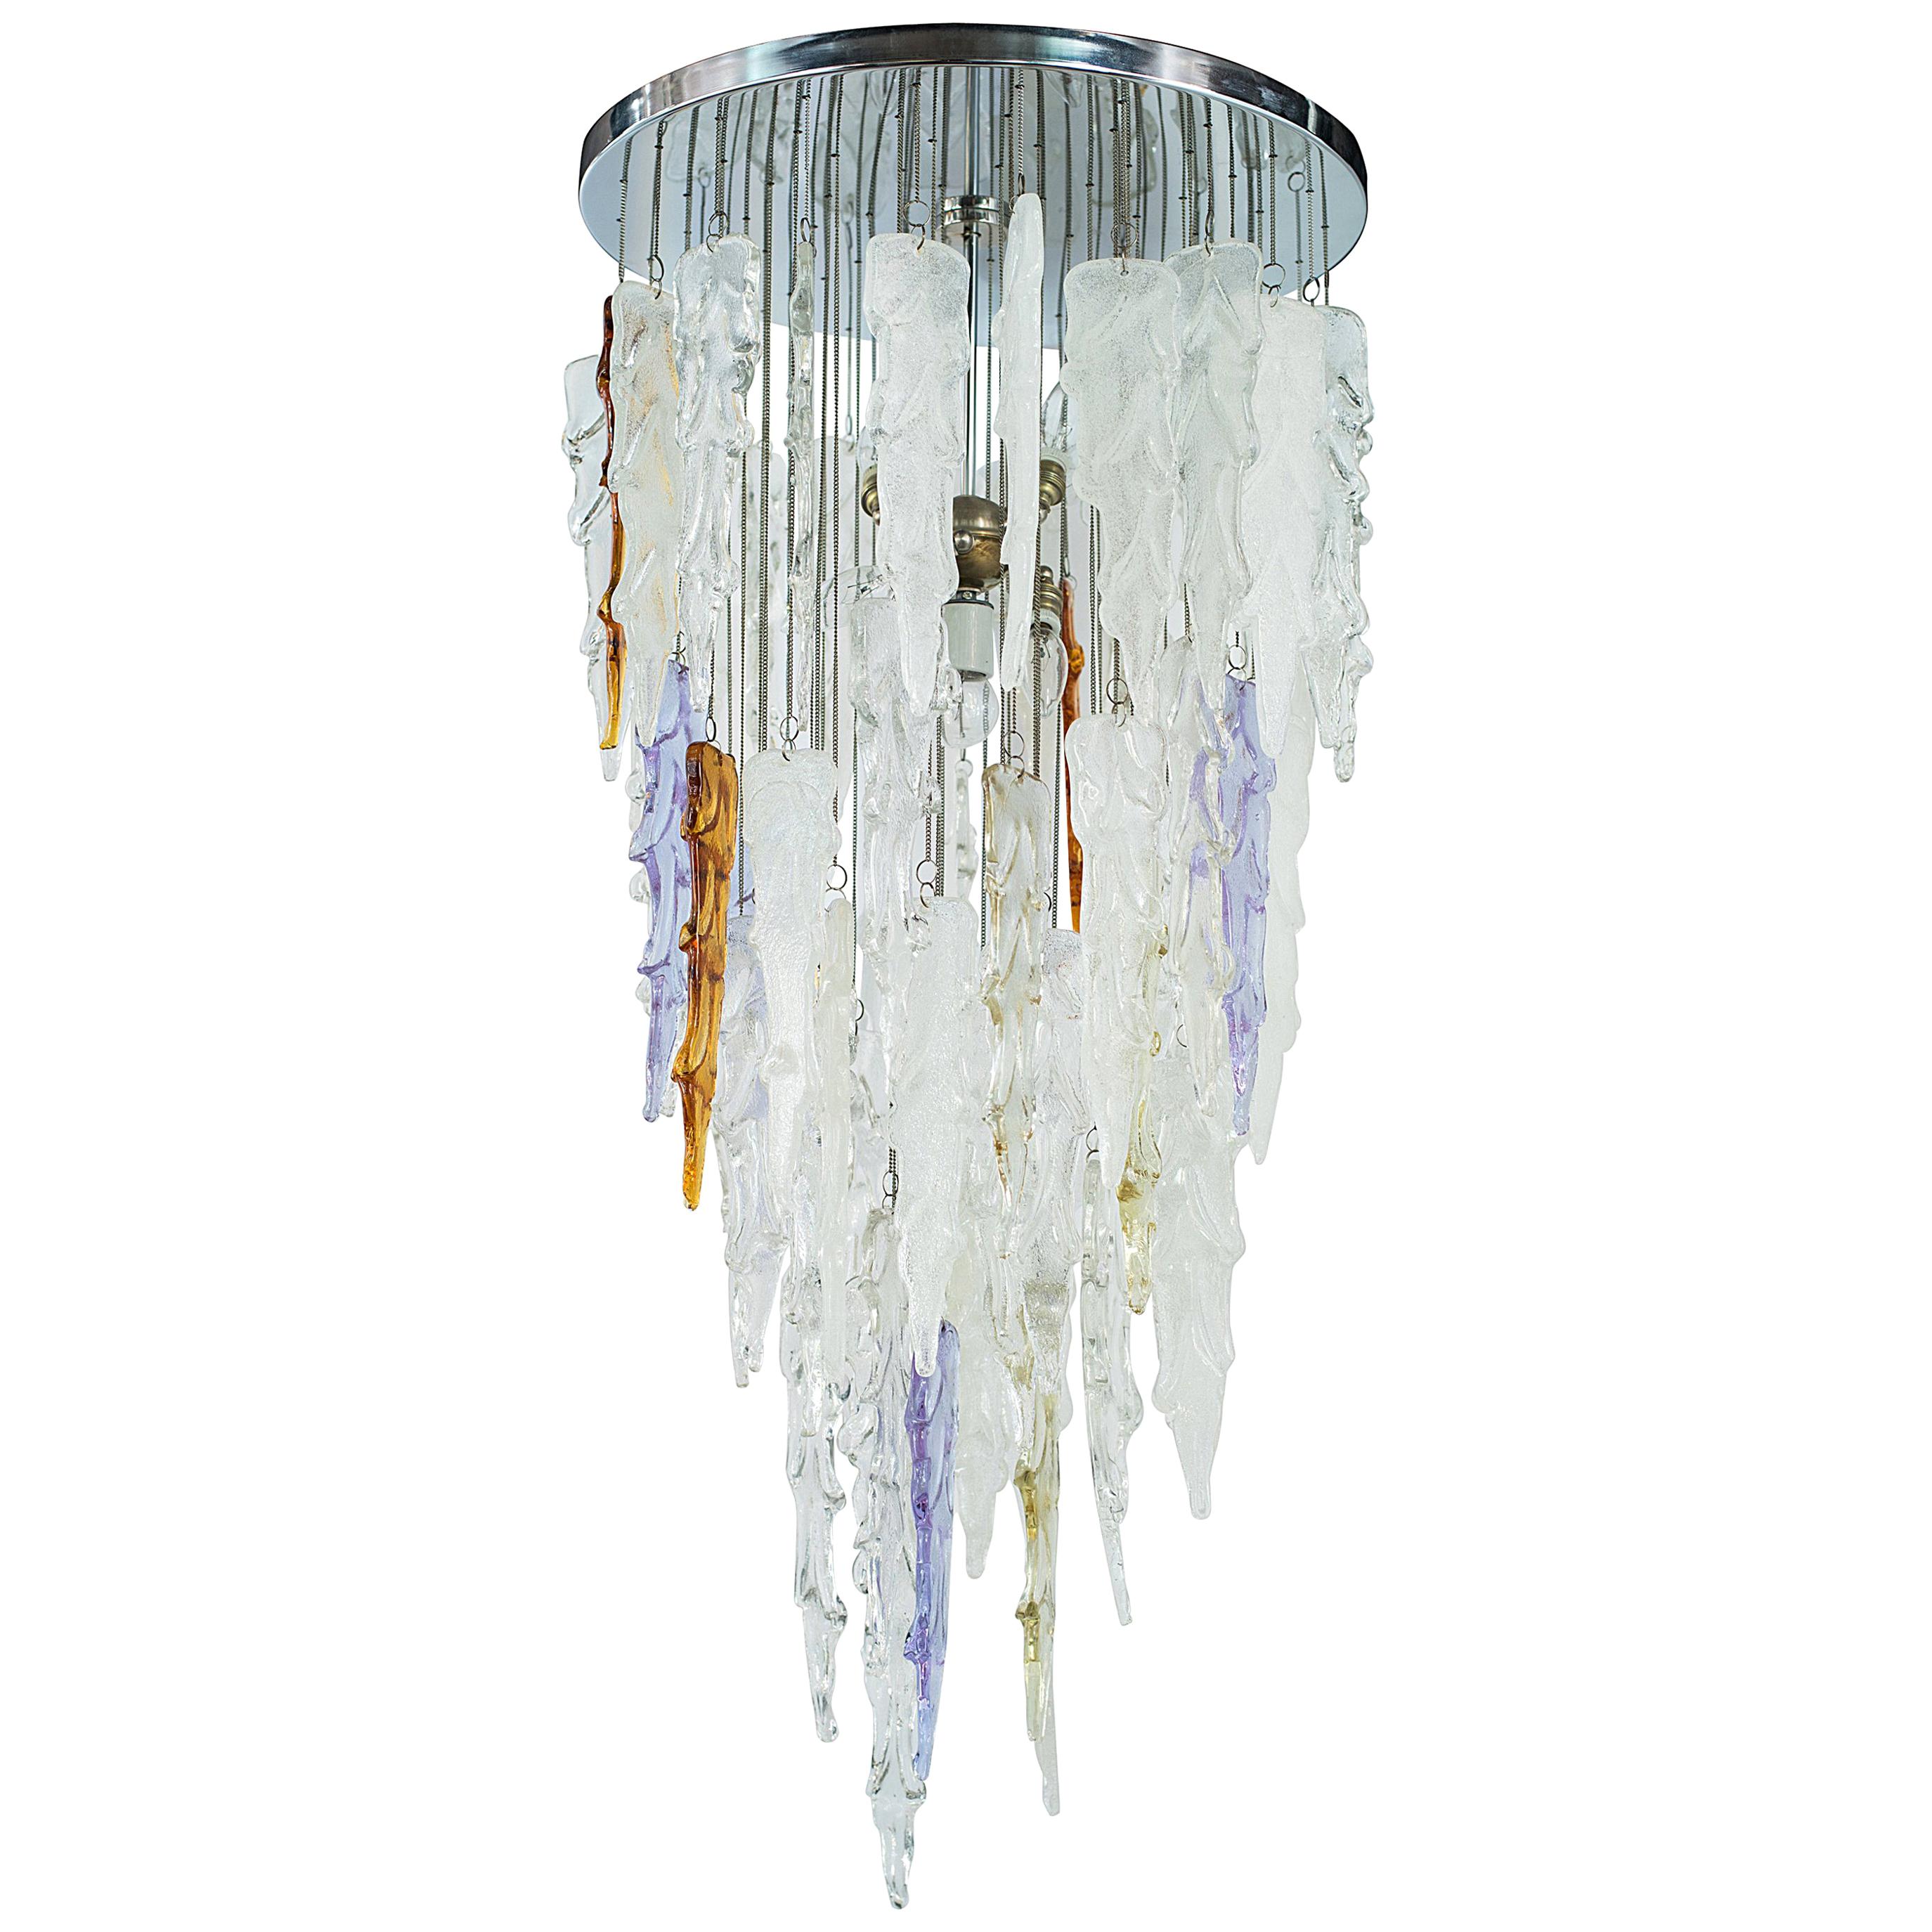 Large Murano Pendant Chandelier with Colored Glass by Mazzega, c. 1970s For Sale